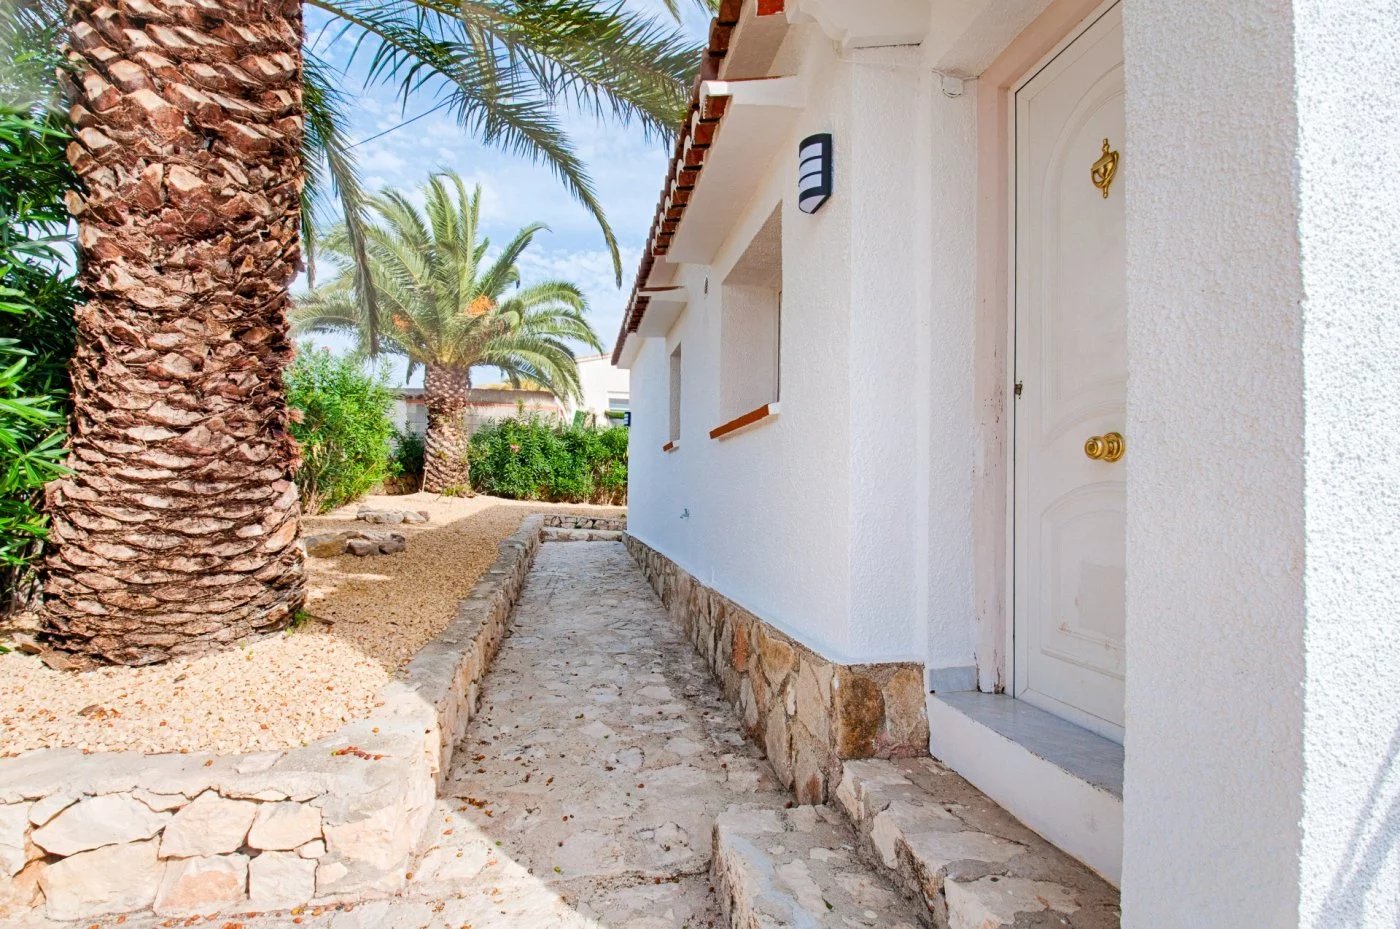 Very well maintained villa with beautiful sea views